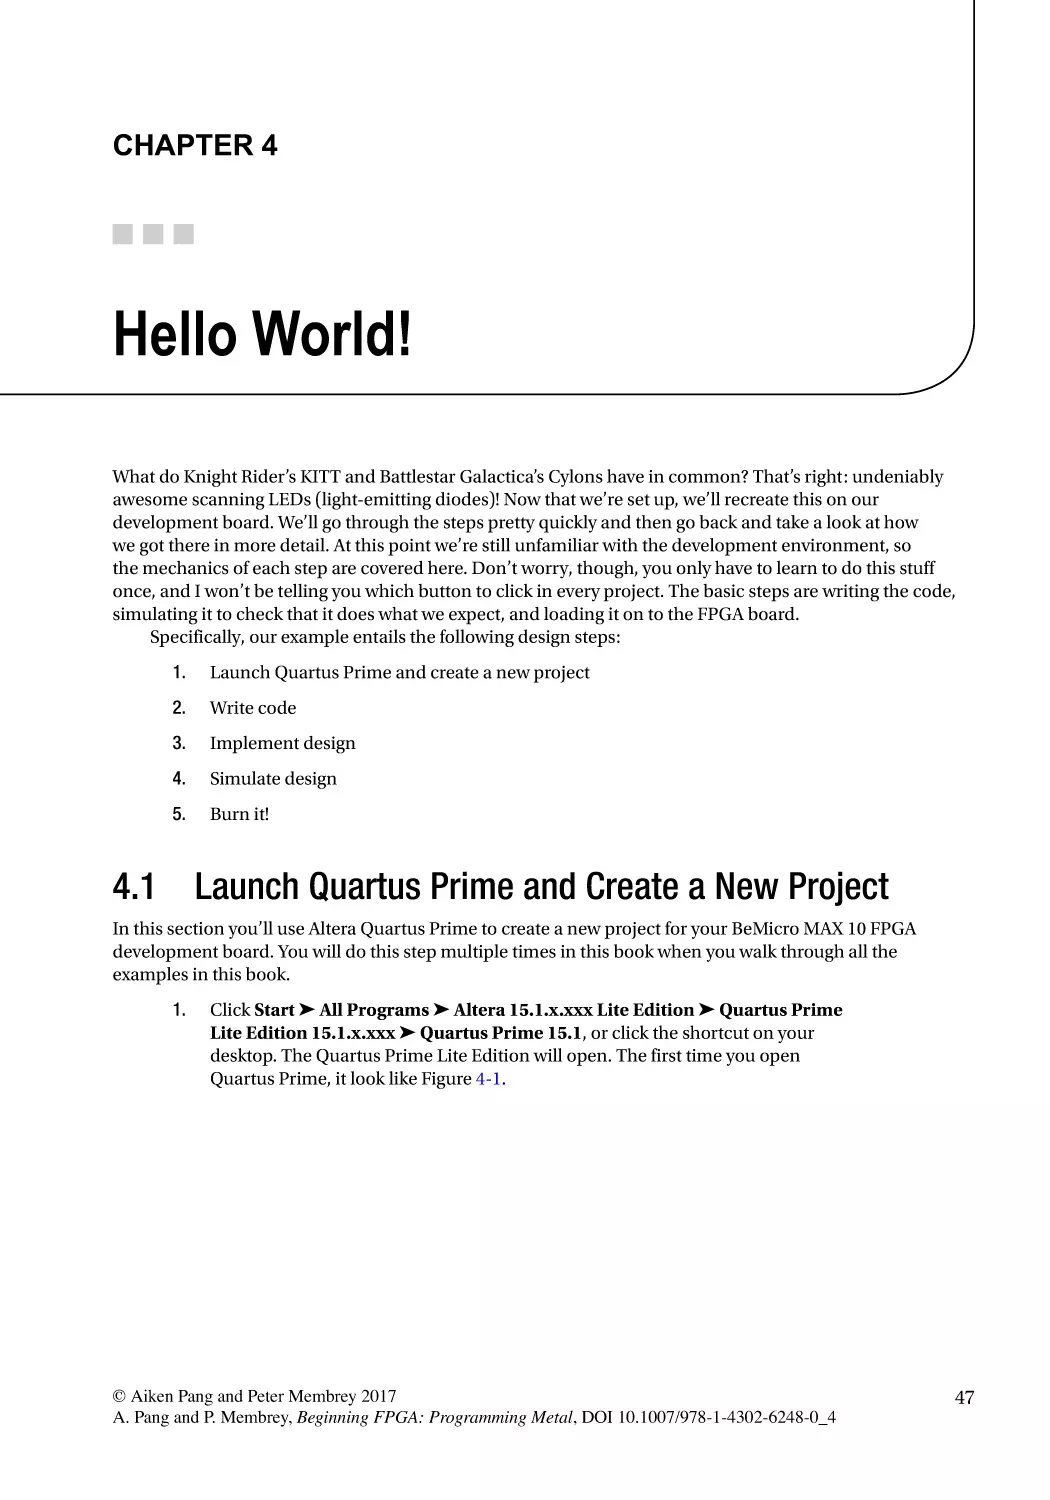 Chapter 4
4.1 Launch Quartus Prime and Create a New Project